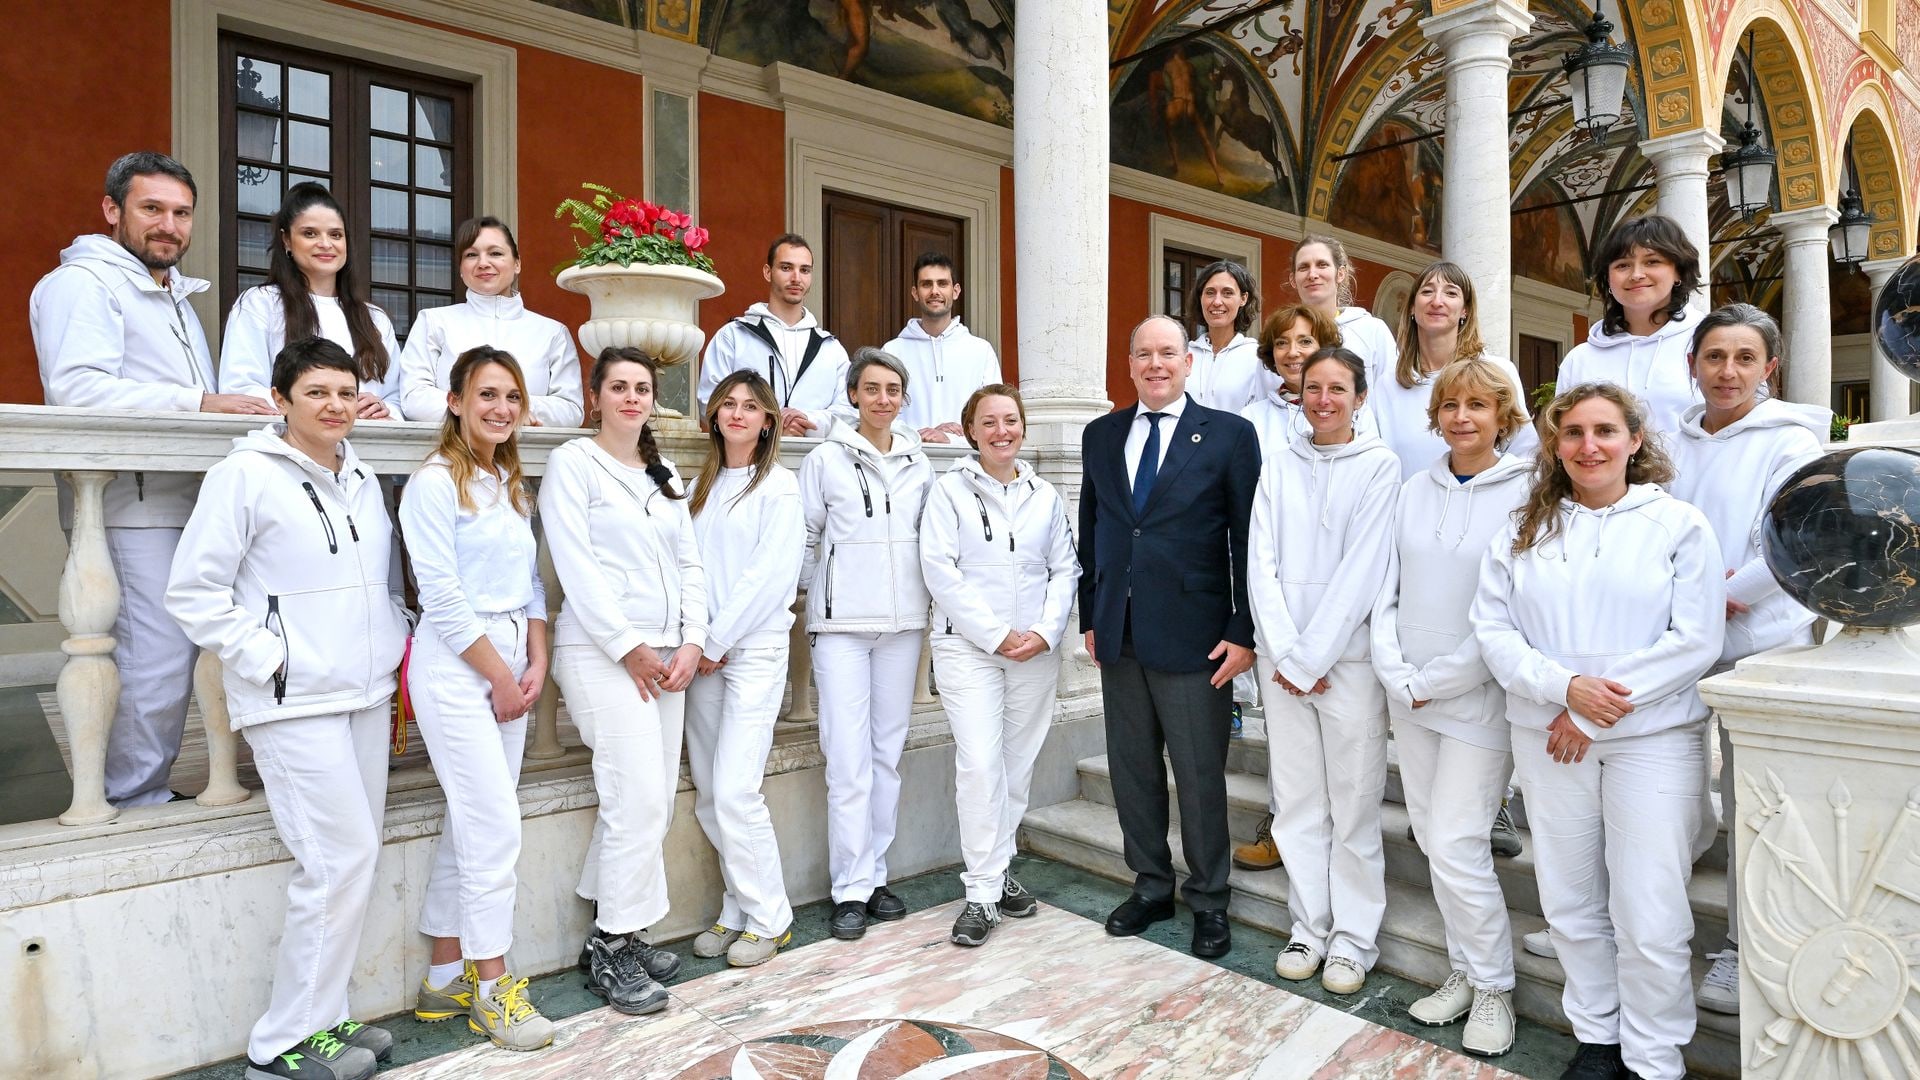 Prince Albert poses with some of the 22-strong team of restorers, painters, engineers, architects and photographers who carried out the extensive work